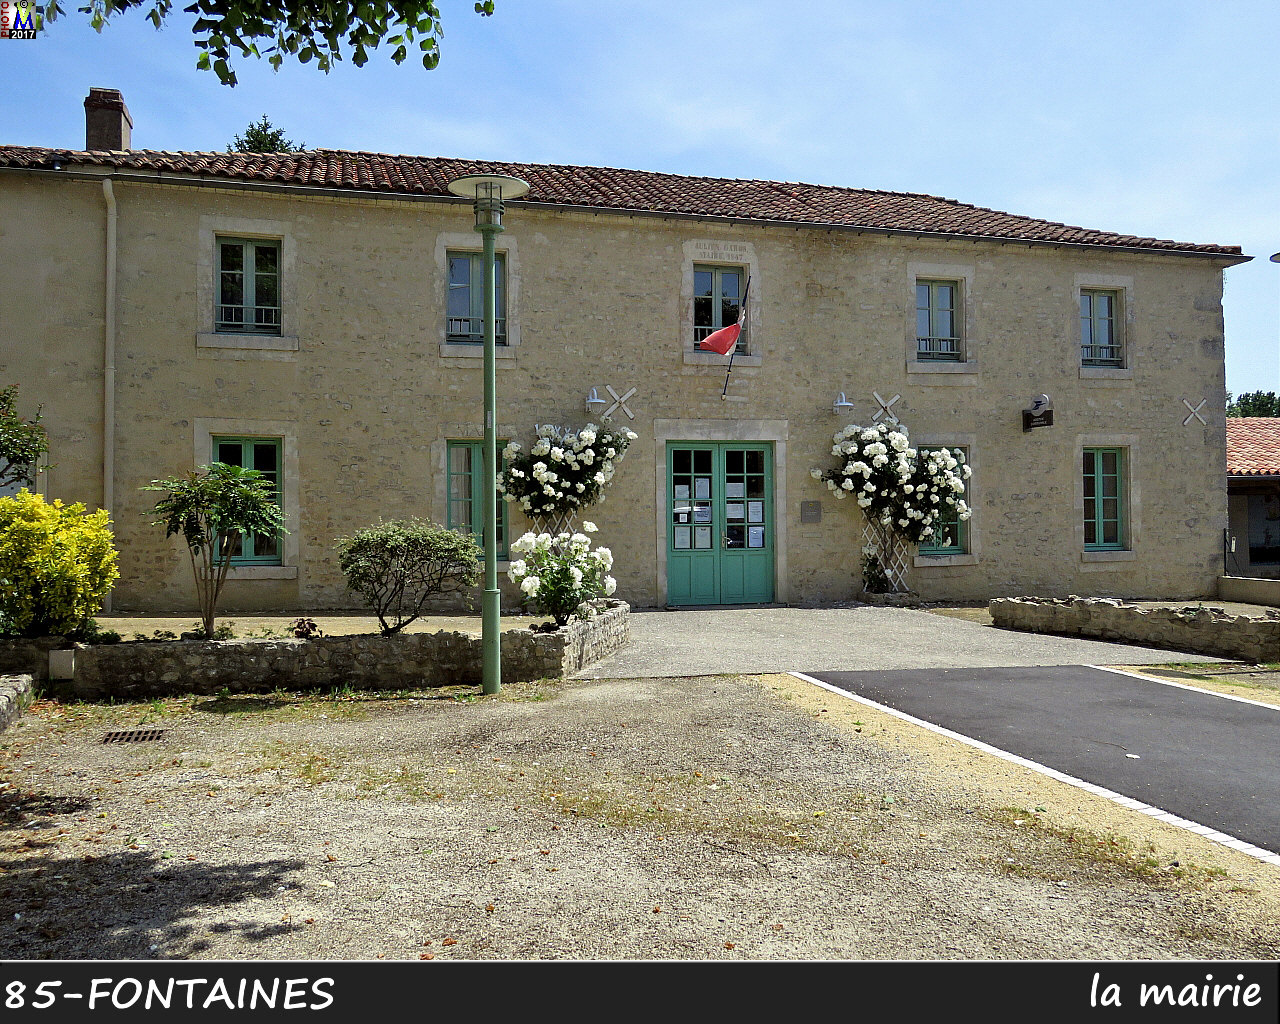 85FONTAINES_mairie_1000.jpg